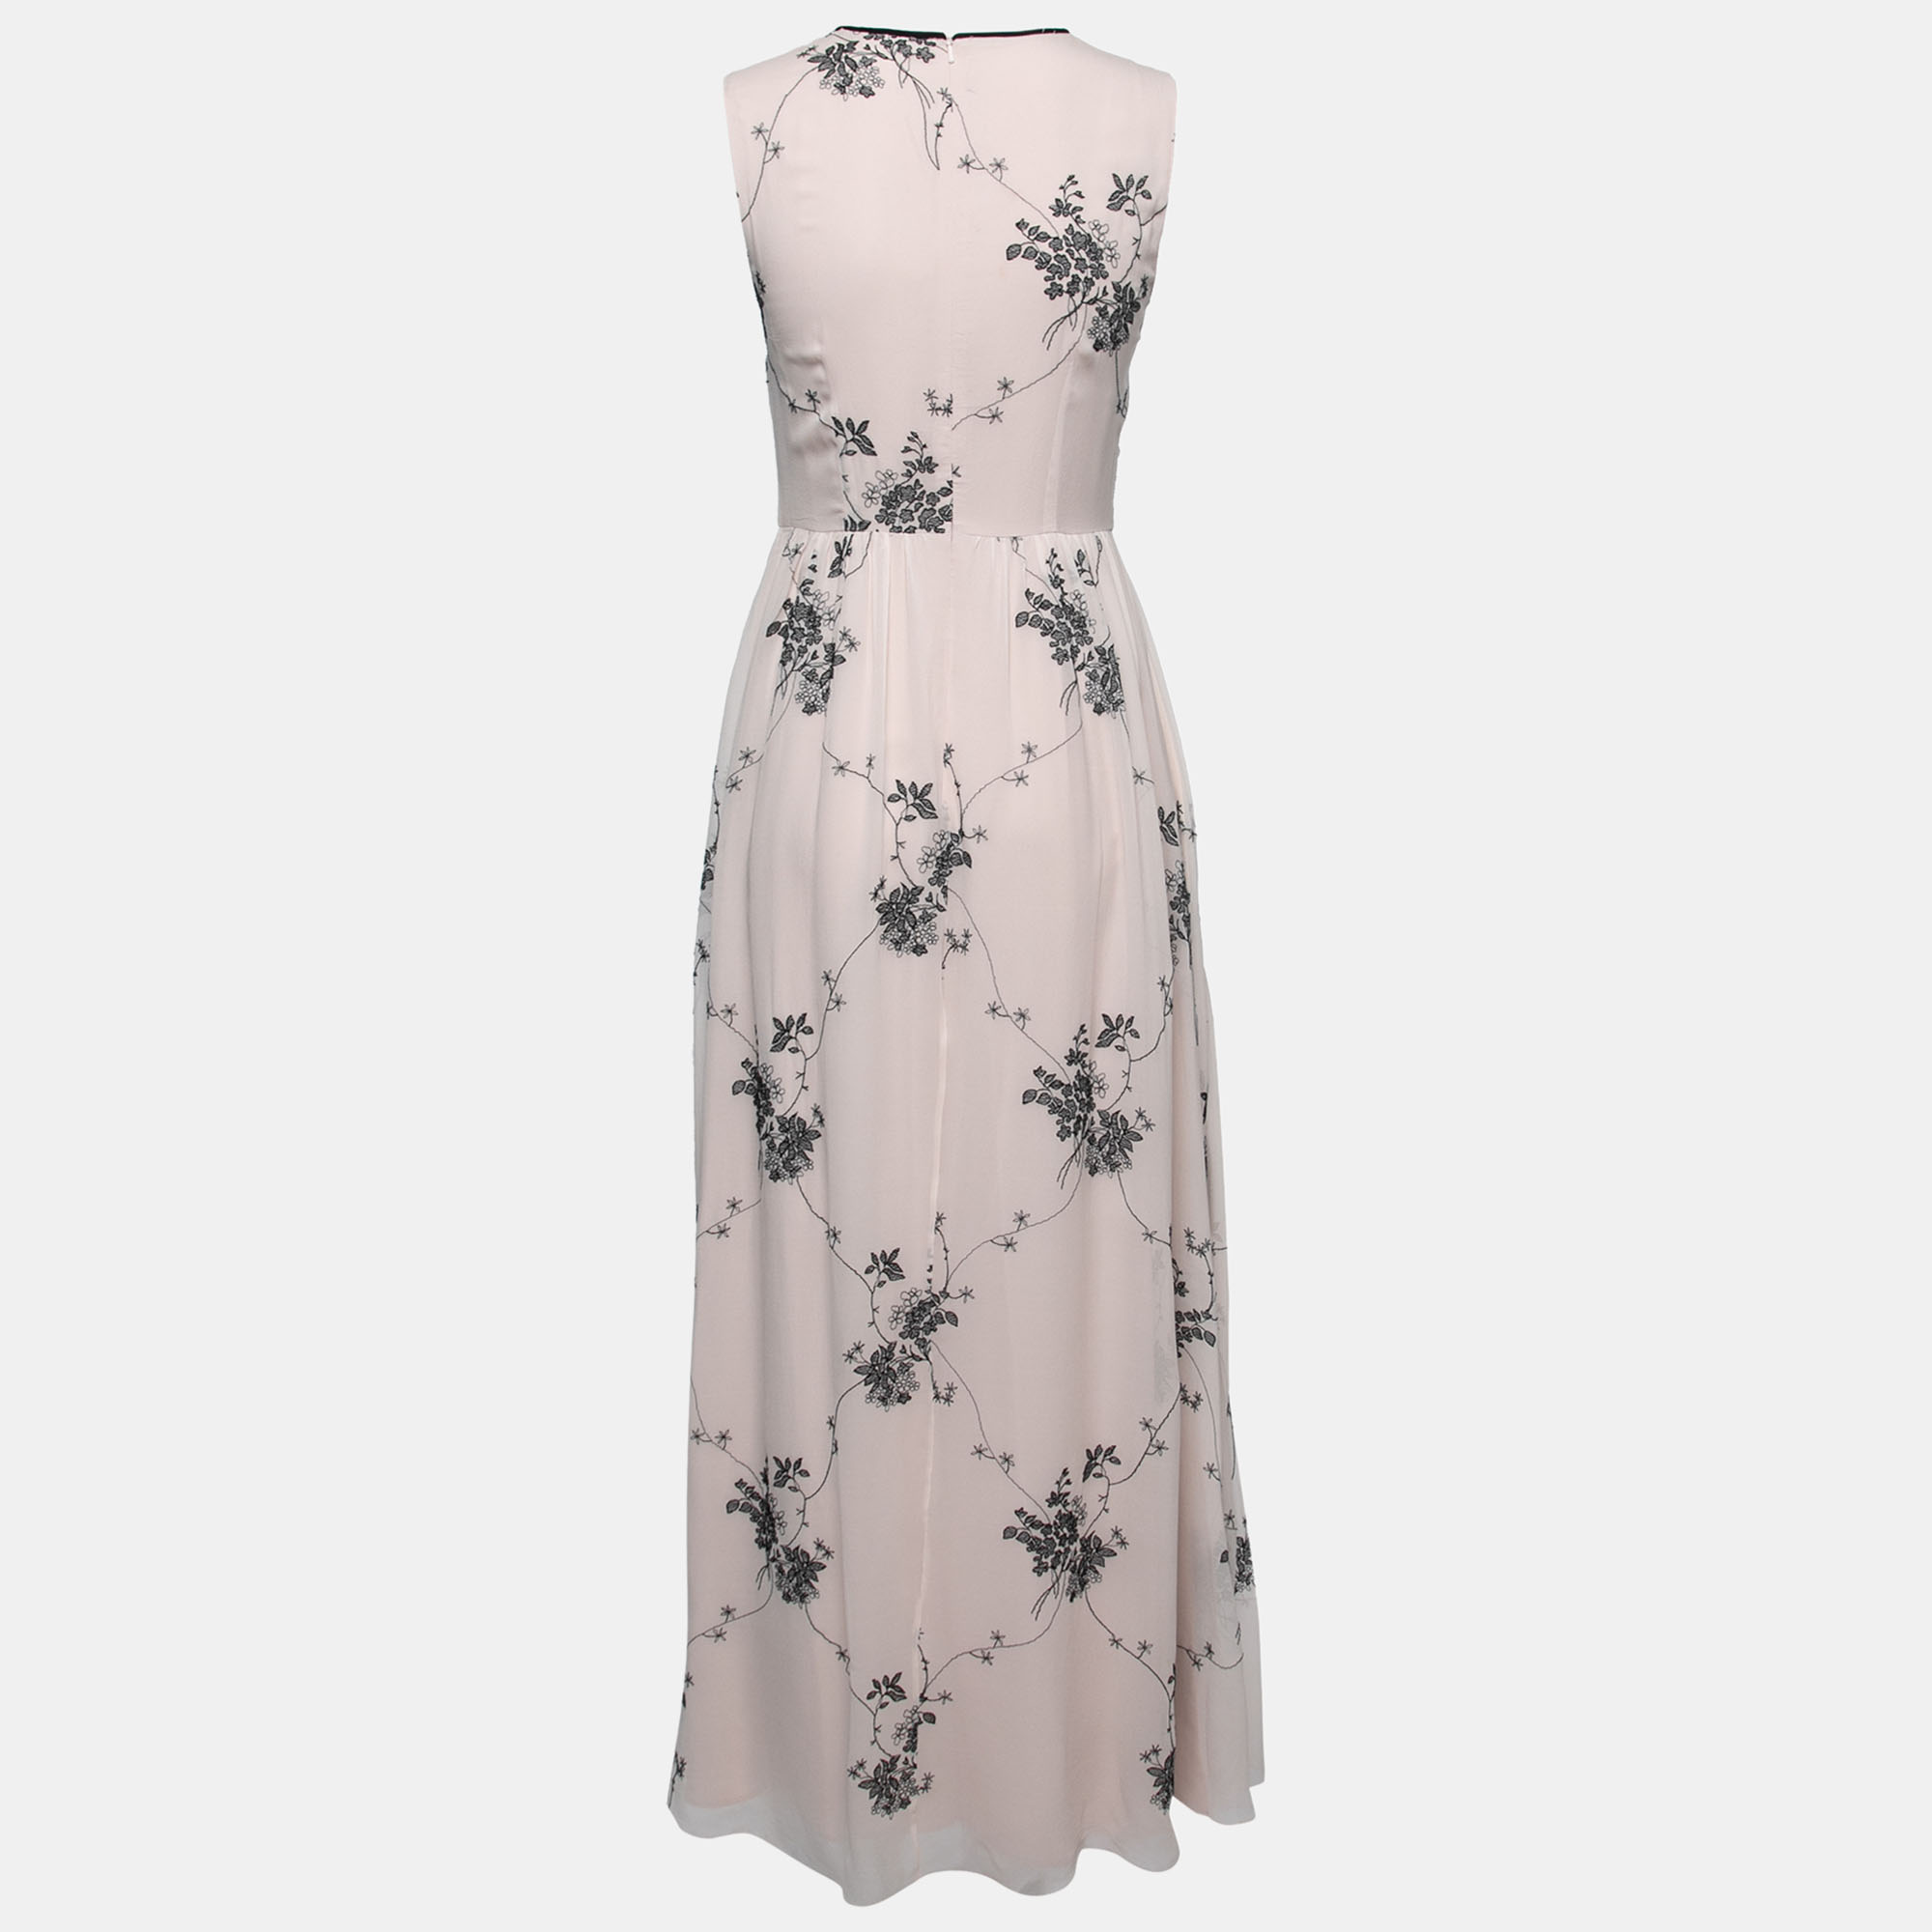 

Max Mara Studio Pink Silk Floral Embroidered Ruffle Trimmed Dress